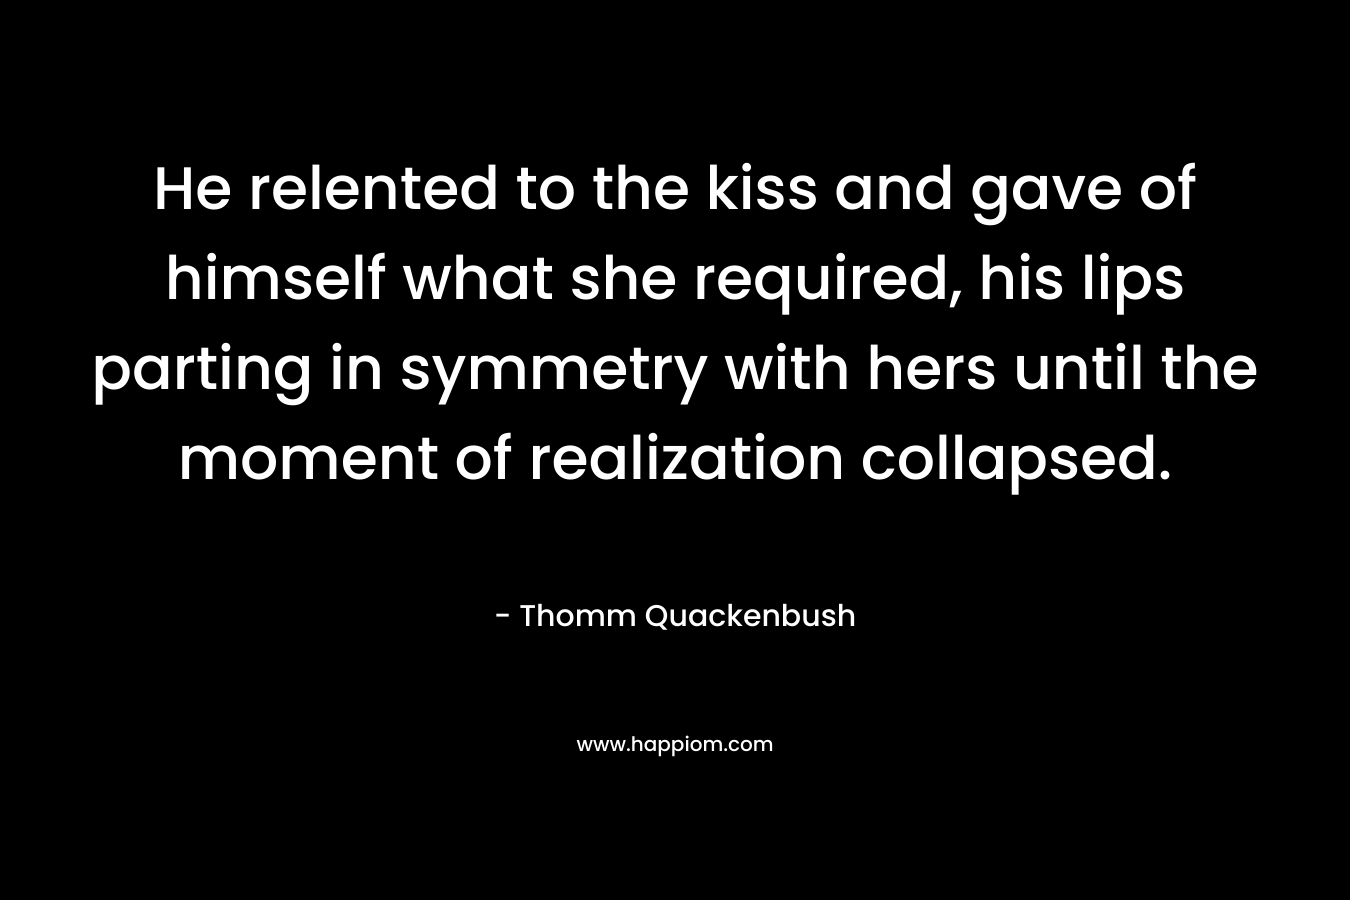 He relented to the kiss and gave of himself what she required, his lips parting in symmetry with hers until the moment of realization collapsed. – Thomm Quackenbush